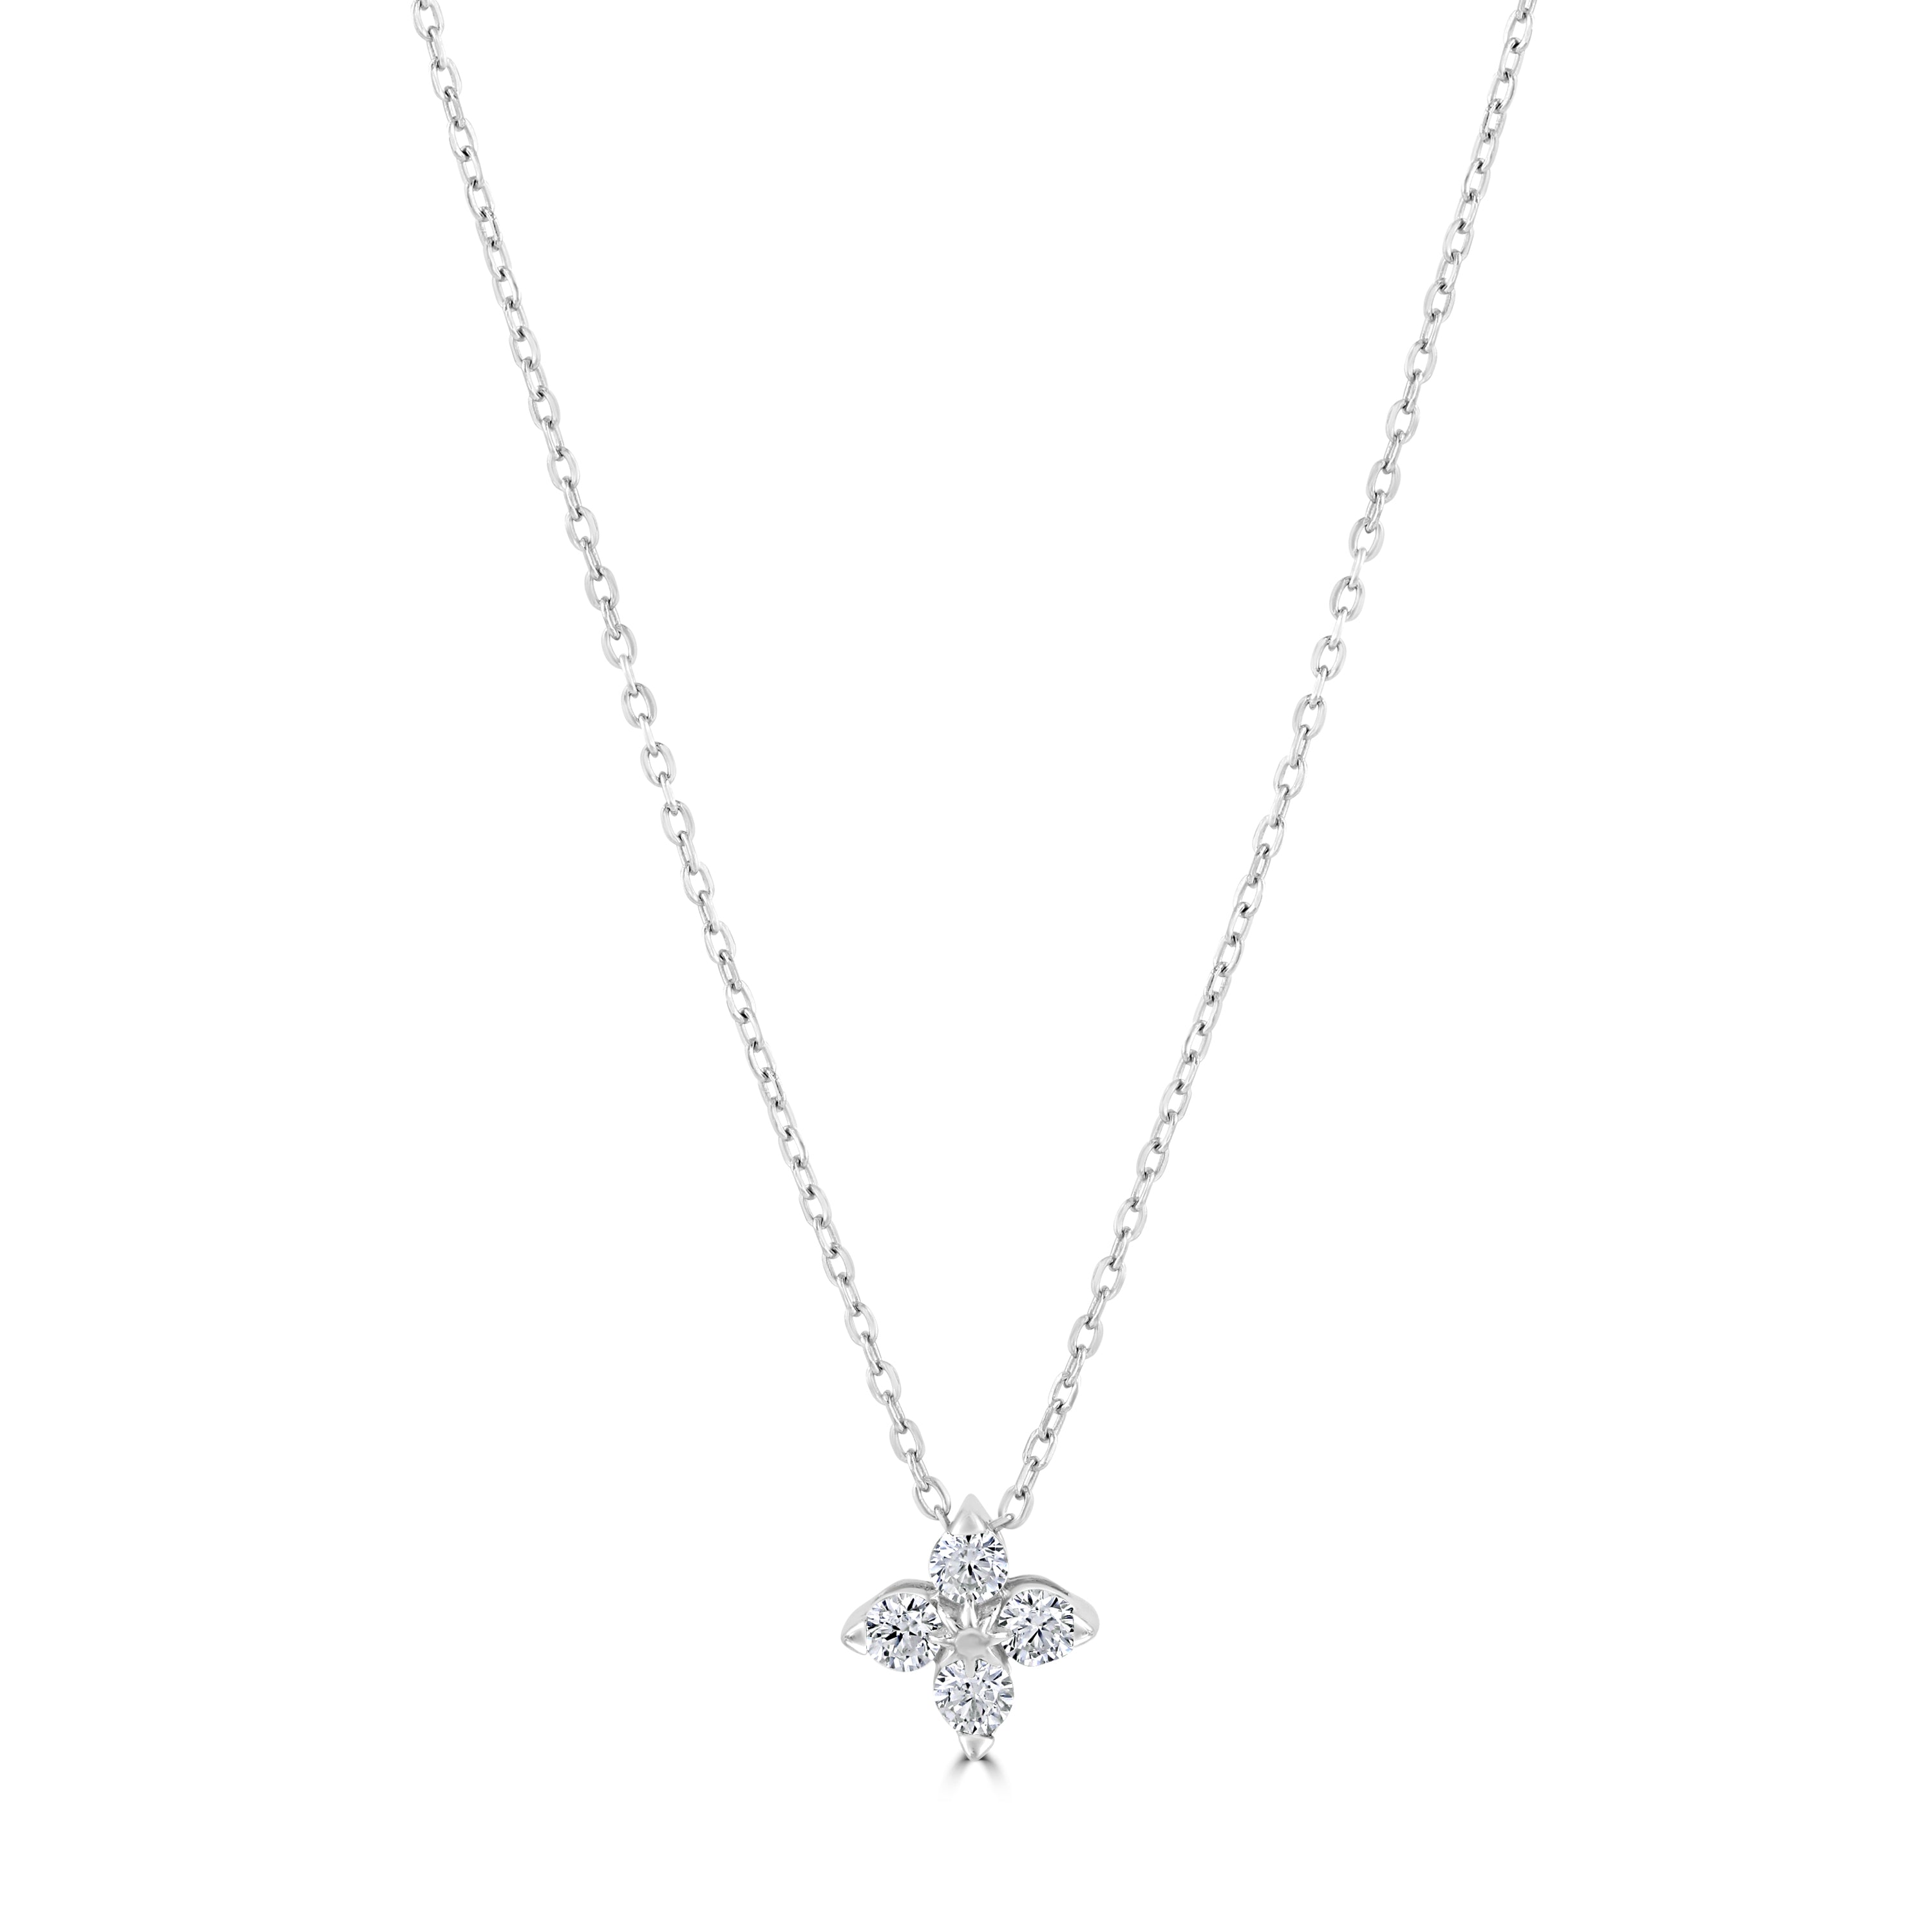 CHLOE // Dainty silver floral necklace